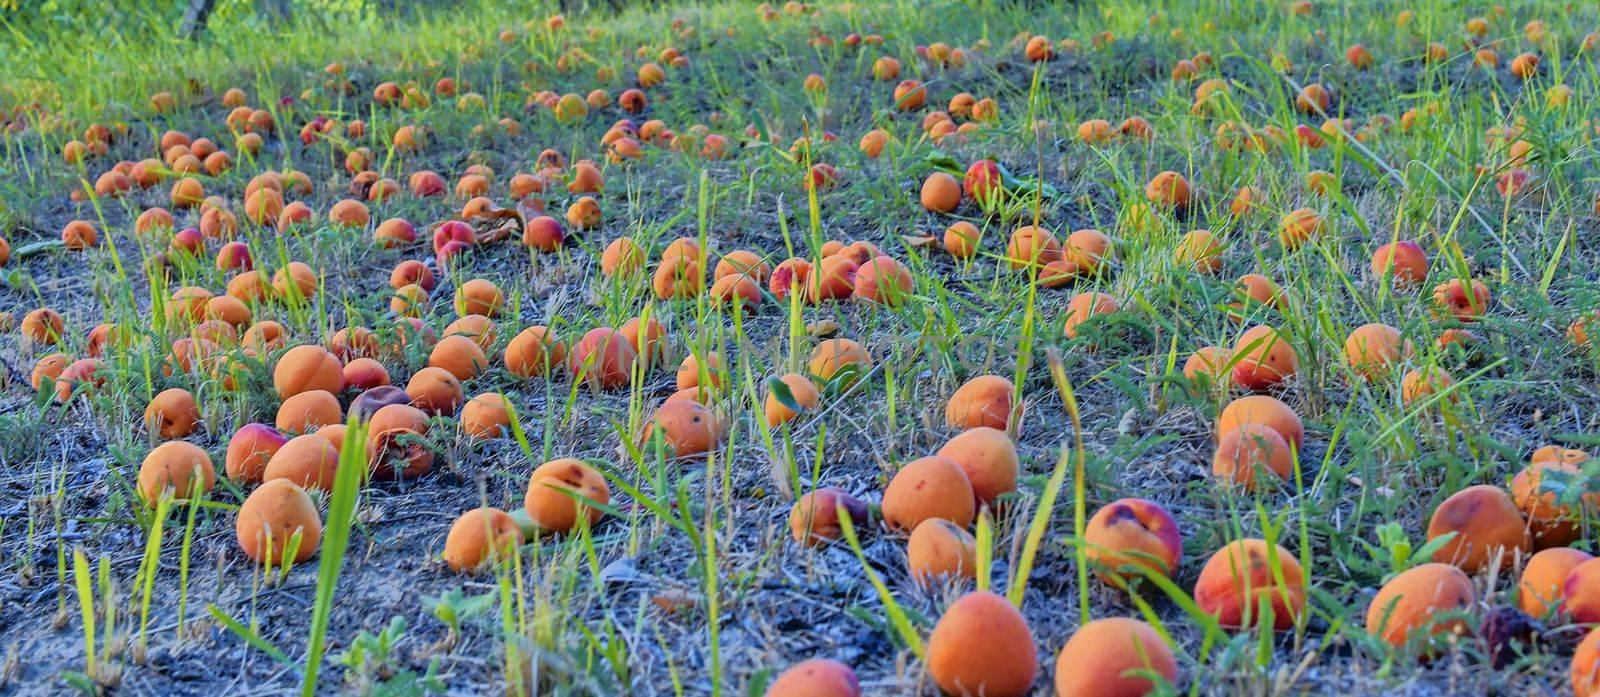 Fallen and rotten apricots on grass. Rural and summer concept. 